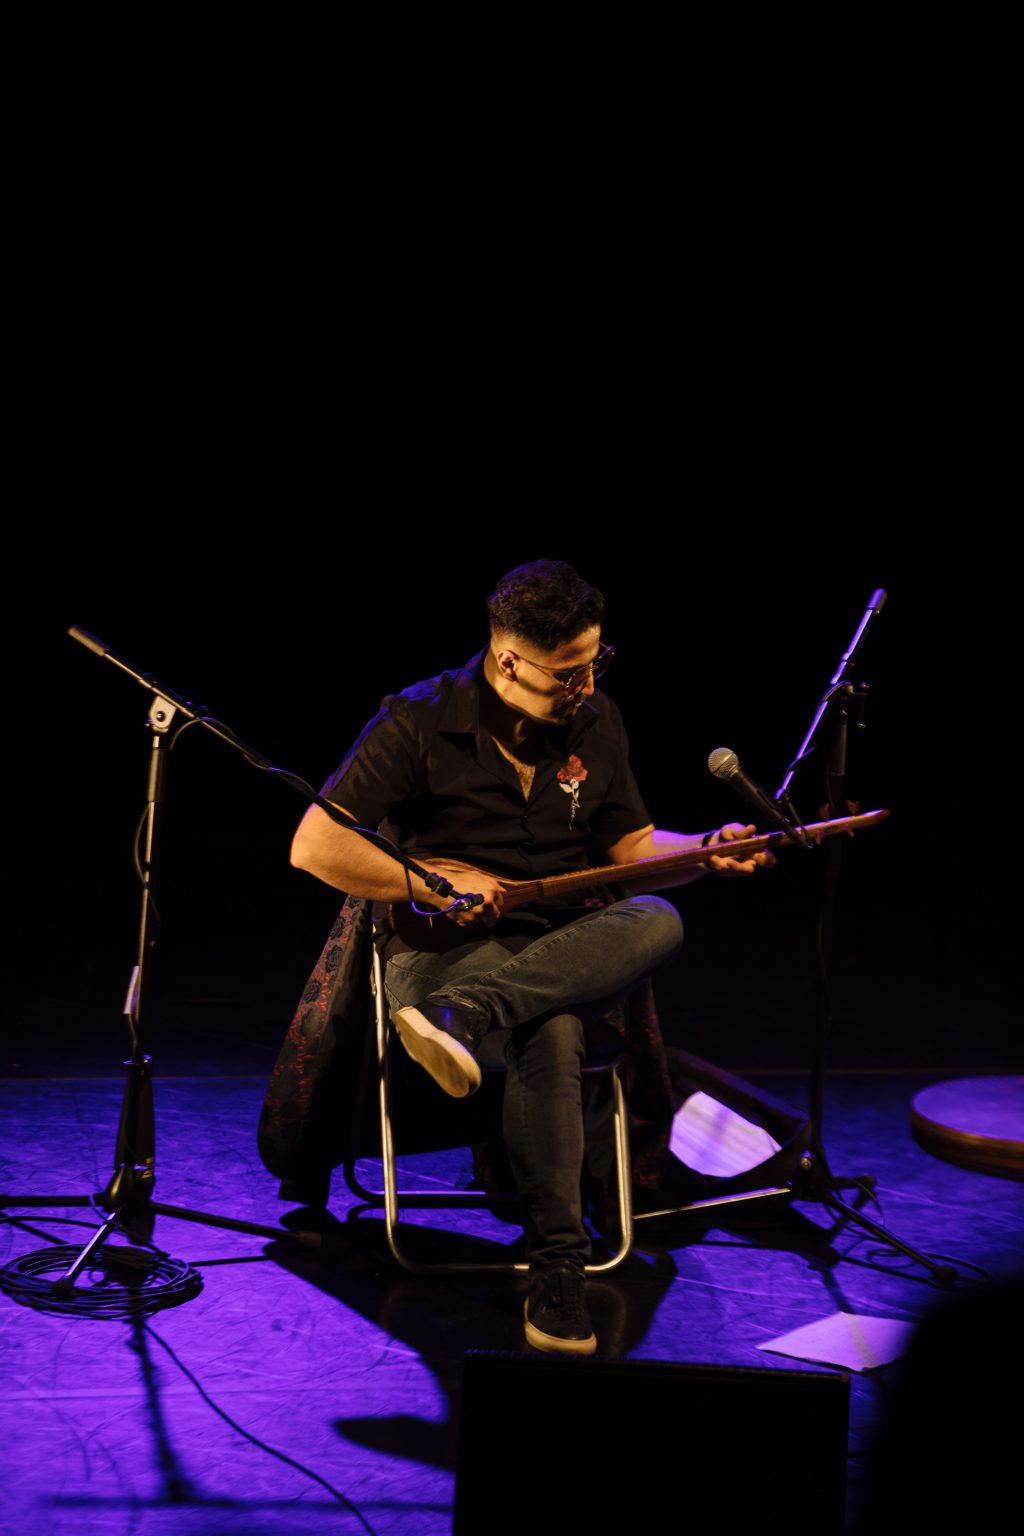 Edinburgh International Festival. Aref sits on a dark stage with his legs crossed as he plays the setar. There are two mics on stands in front of him.